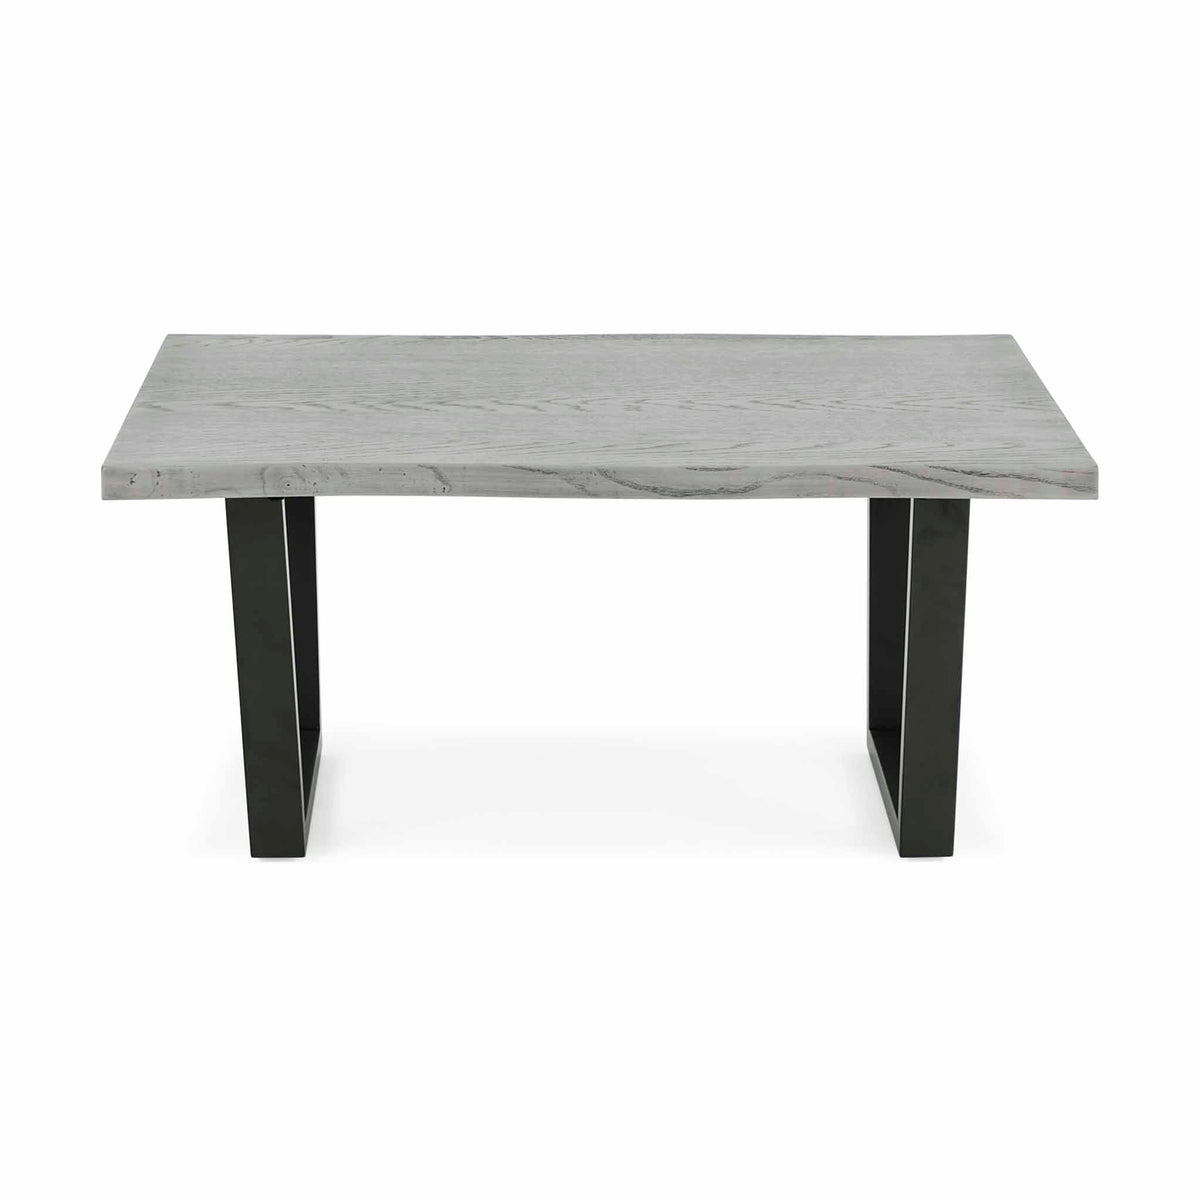 Soho Coffee Table - Front view showing top of table